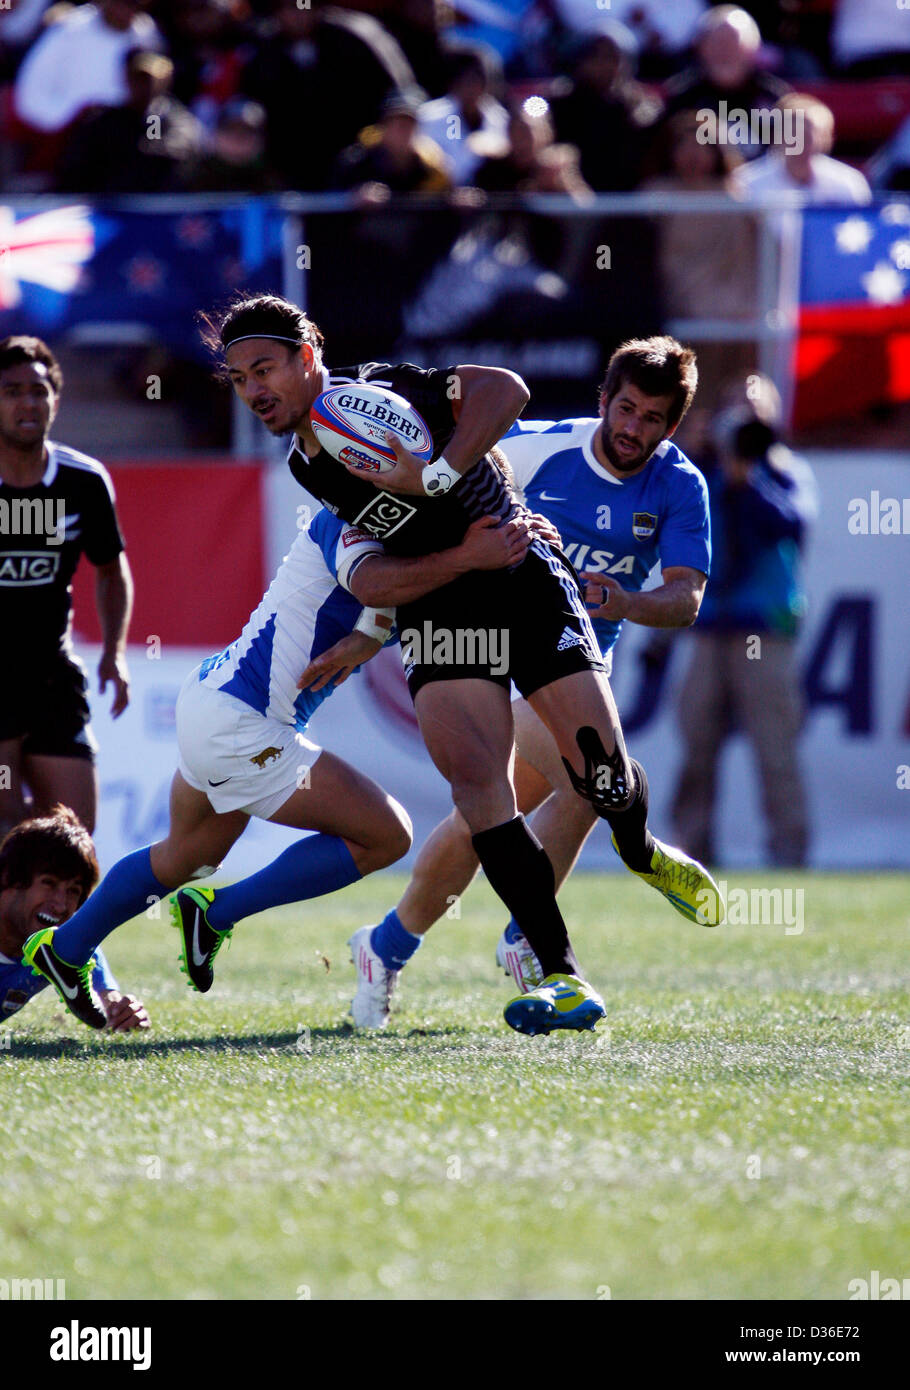 Las Vegas Nevada USA. 9th Feb, 2013. New Zealand versus Argentina players during Round 5 of the HSBC Sevens World Series of Rugby at Sam Boyd Stadium in Las Vegas, Nevada.  New Zealand would defeat Argentina 15-5. Stock Photo